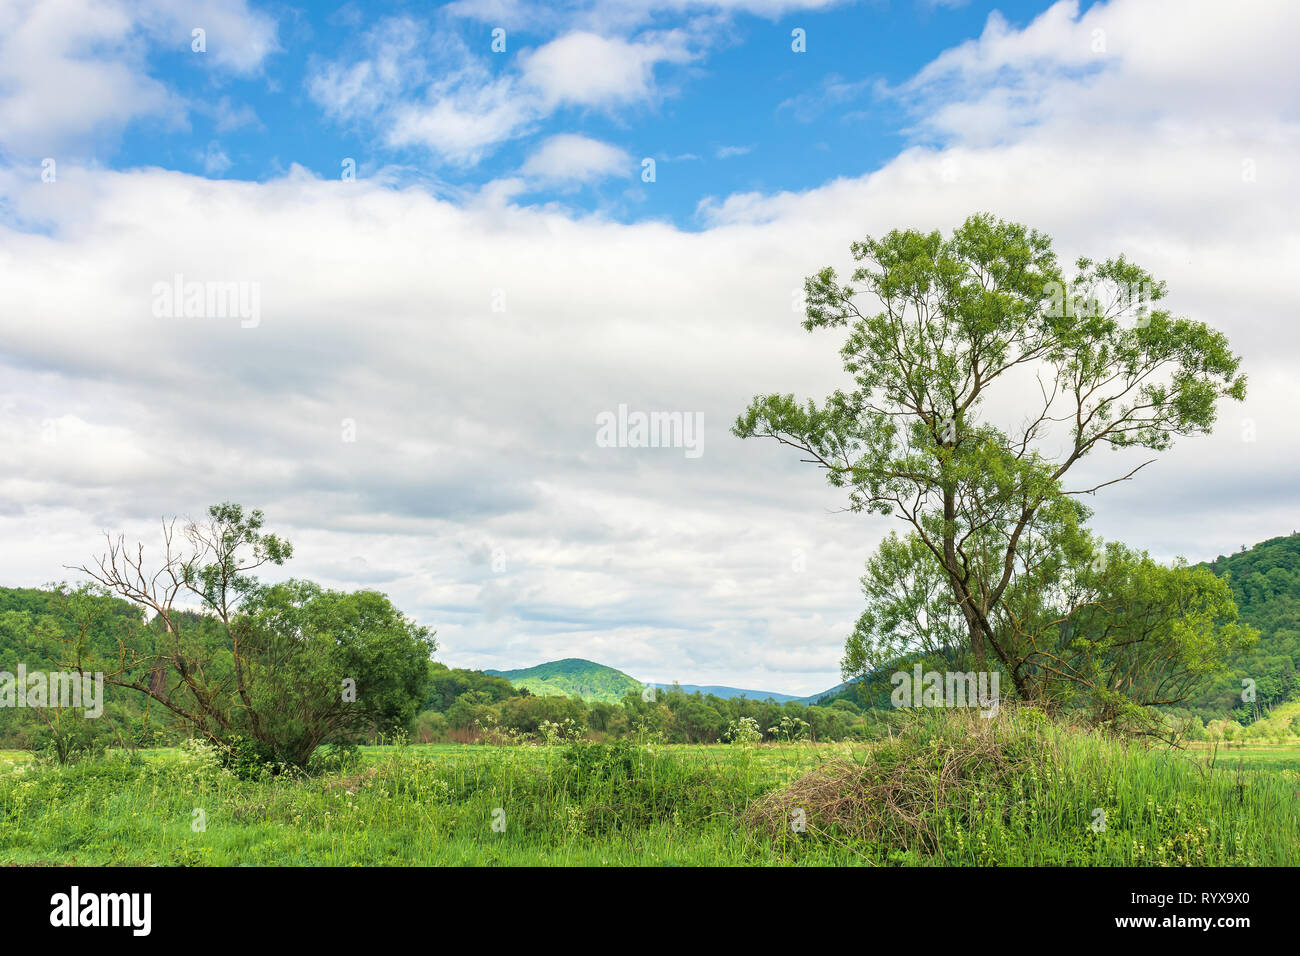 summer countryside in mountains. trees on a rural field in mountains. cloudy morning sky. hill in the distance. Stock Photo